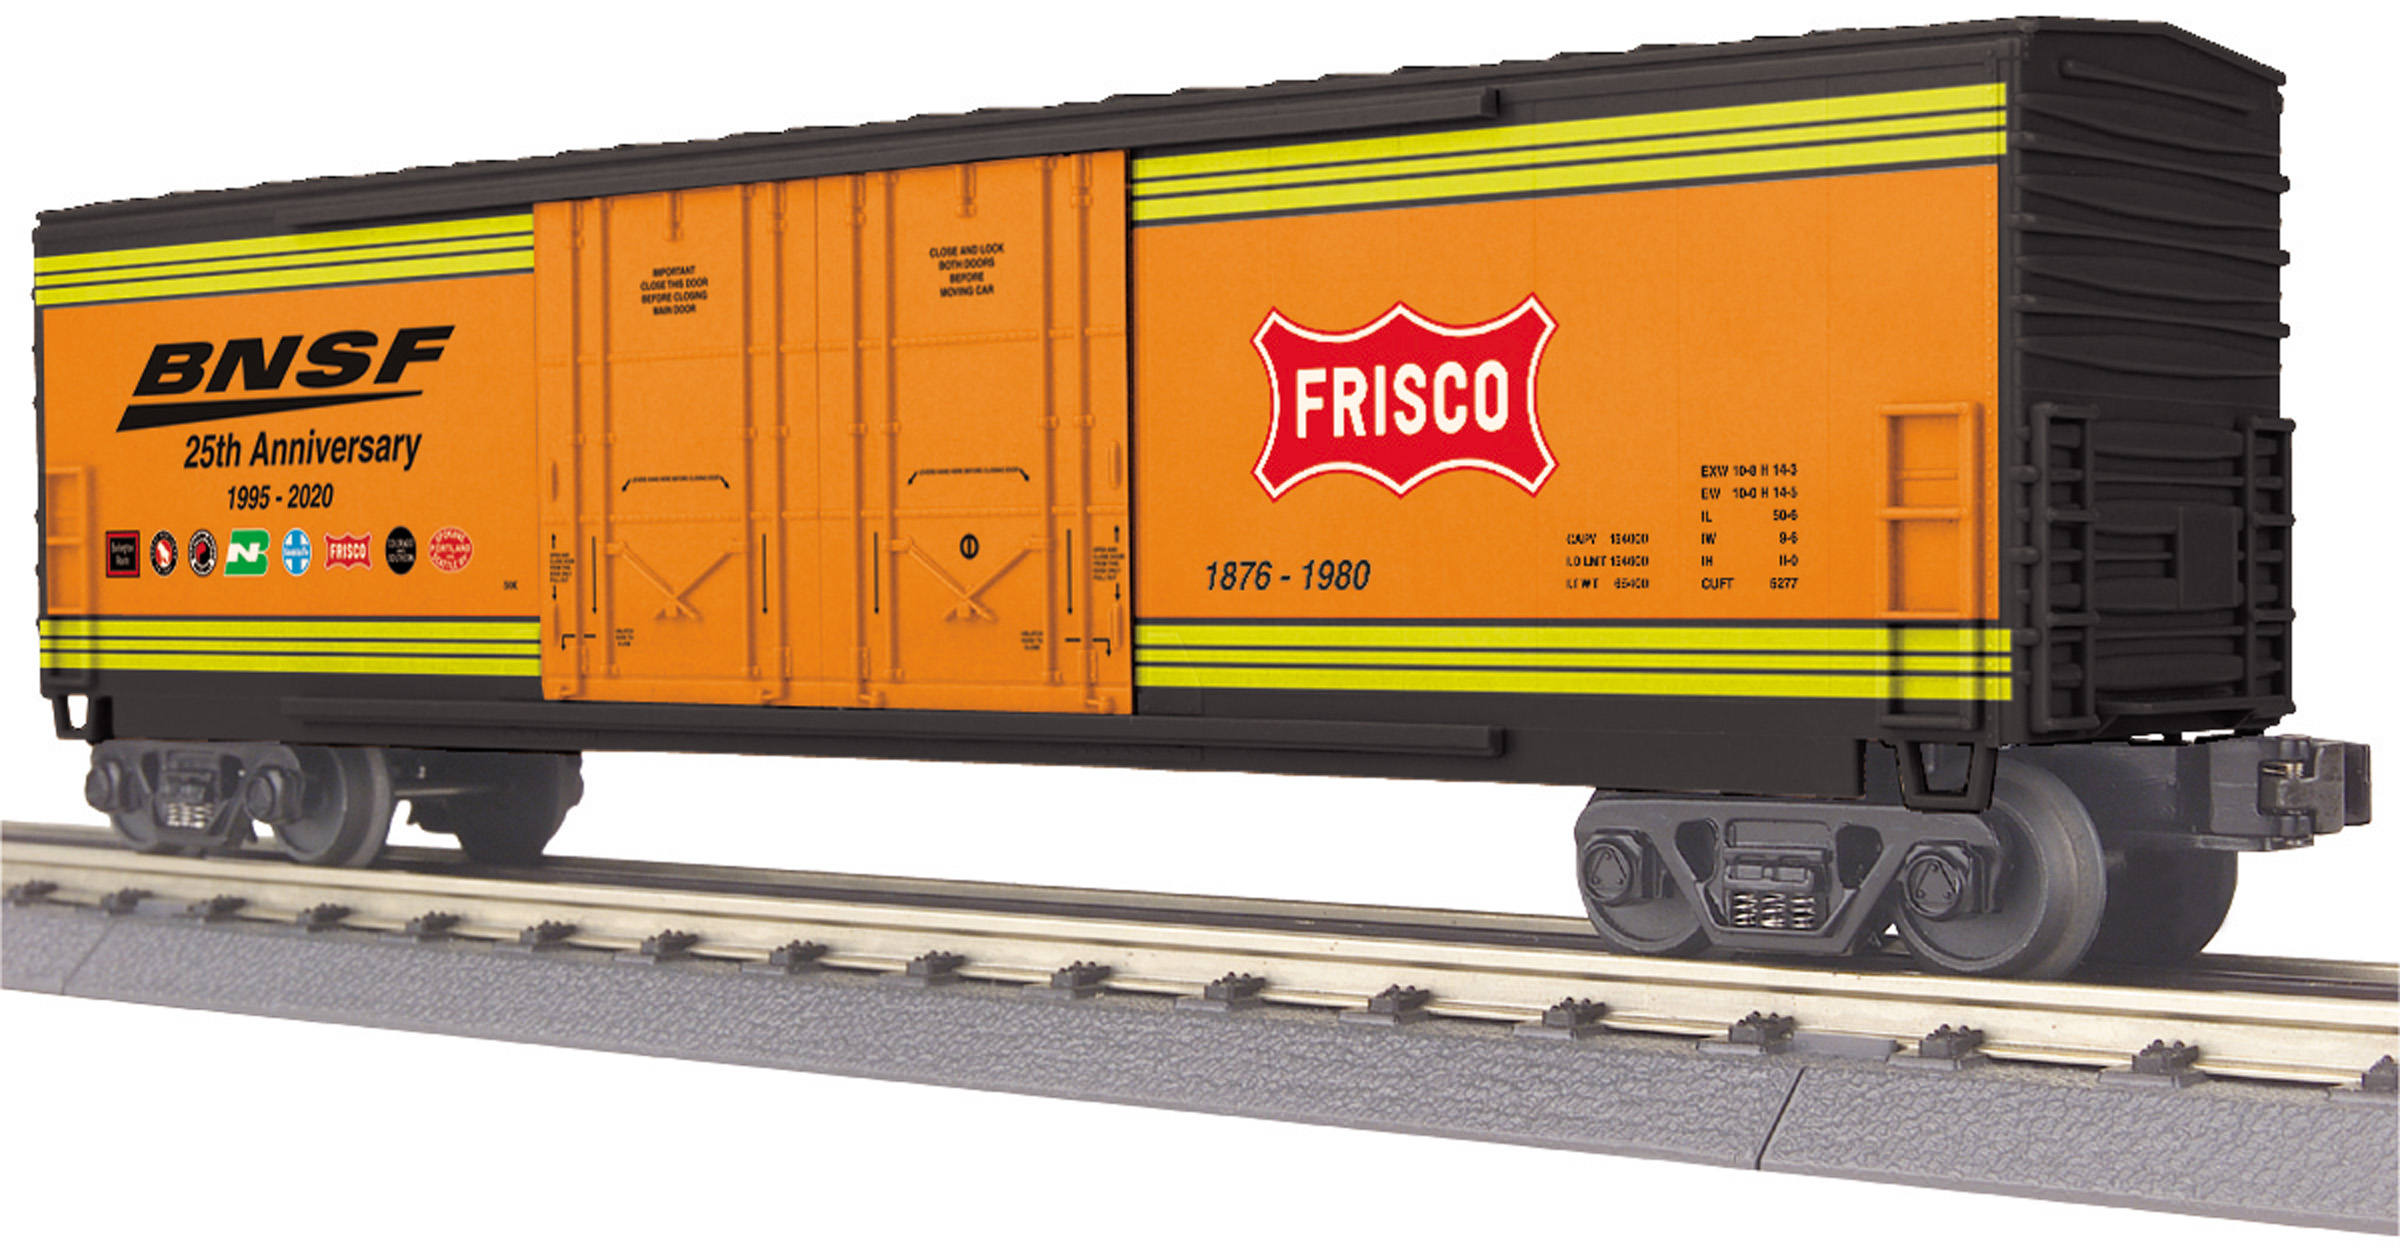 BNSF (25th Anniversary) 8-Car 50' Double Door Plugged Boxcar - Frisco image